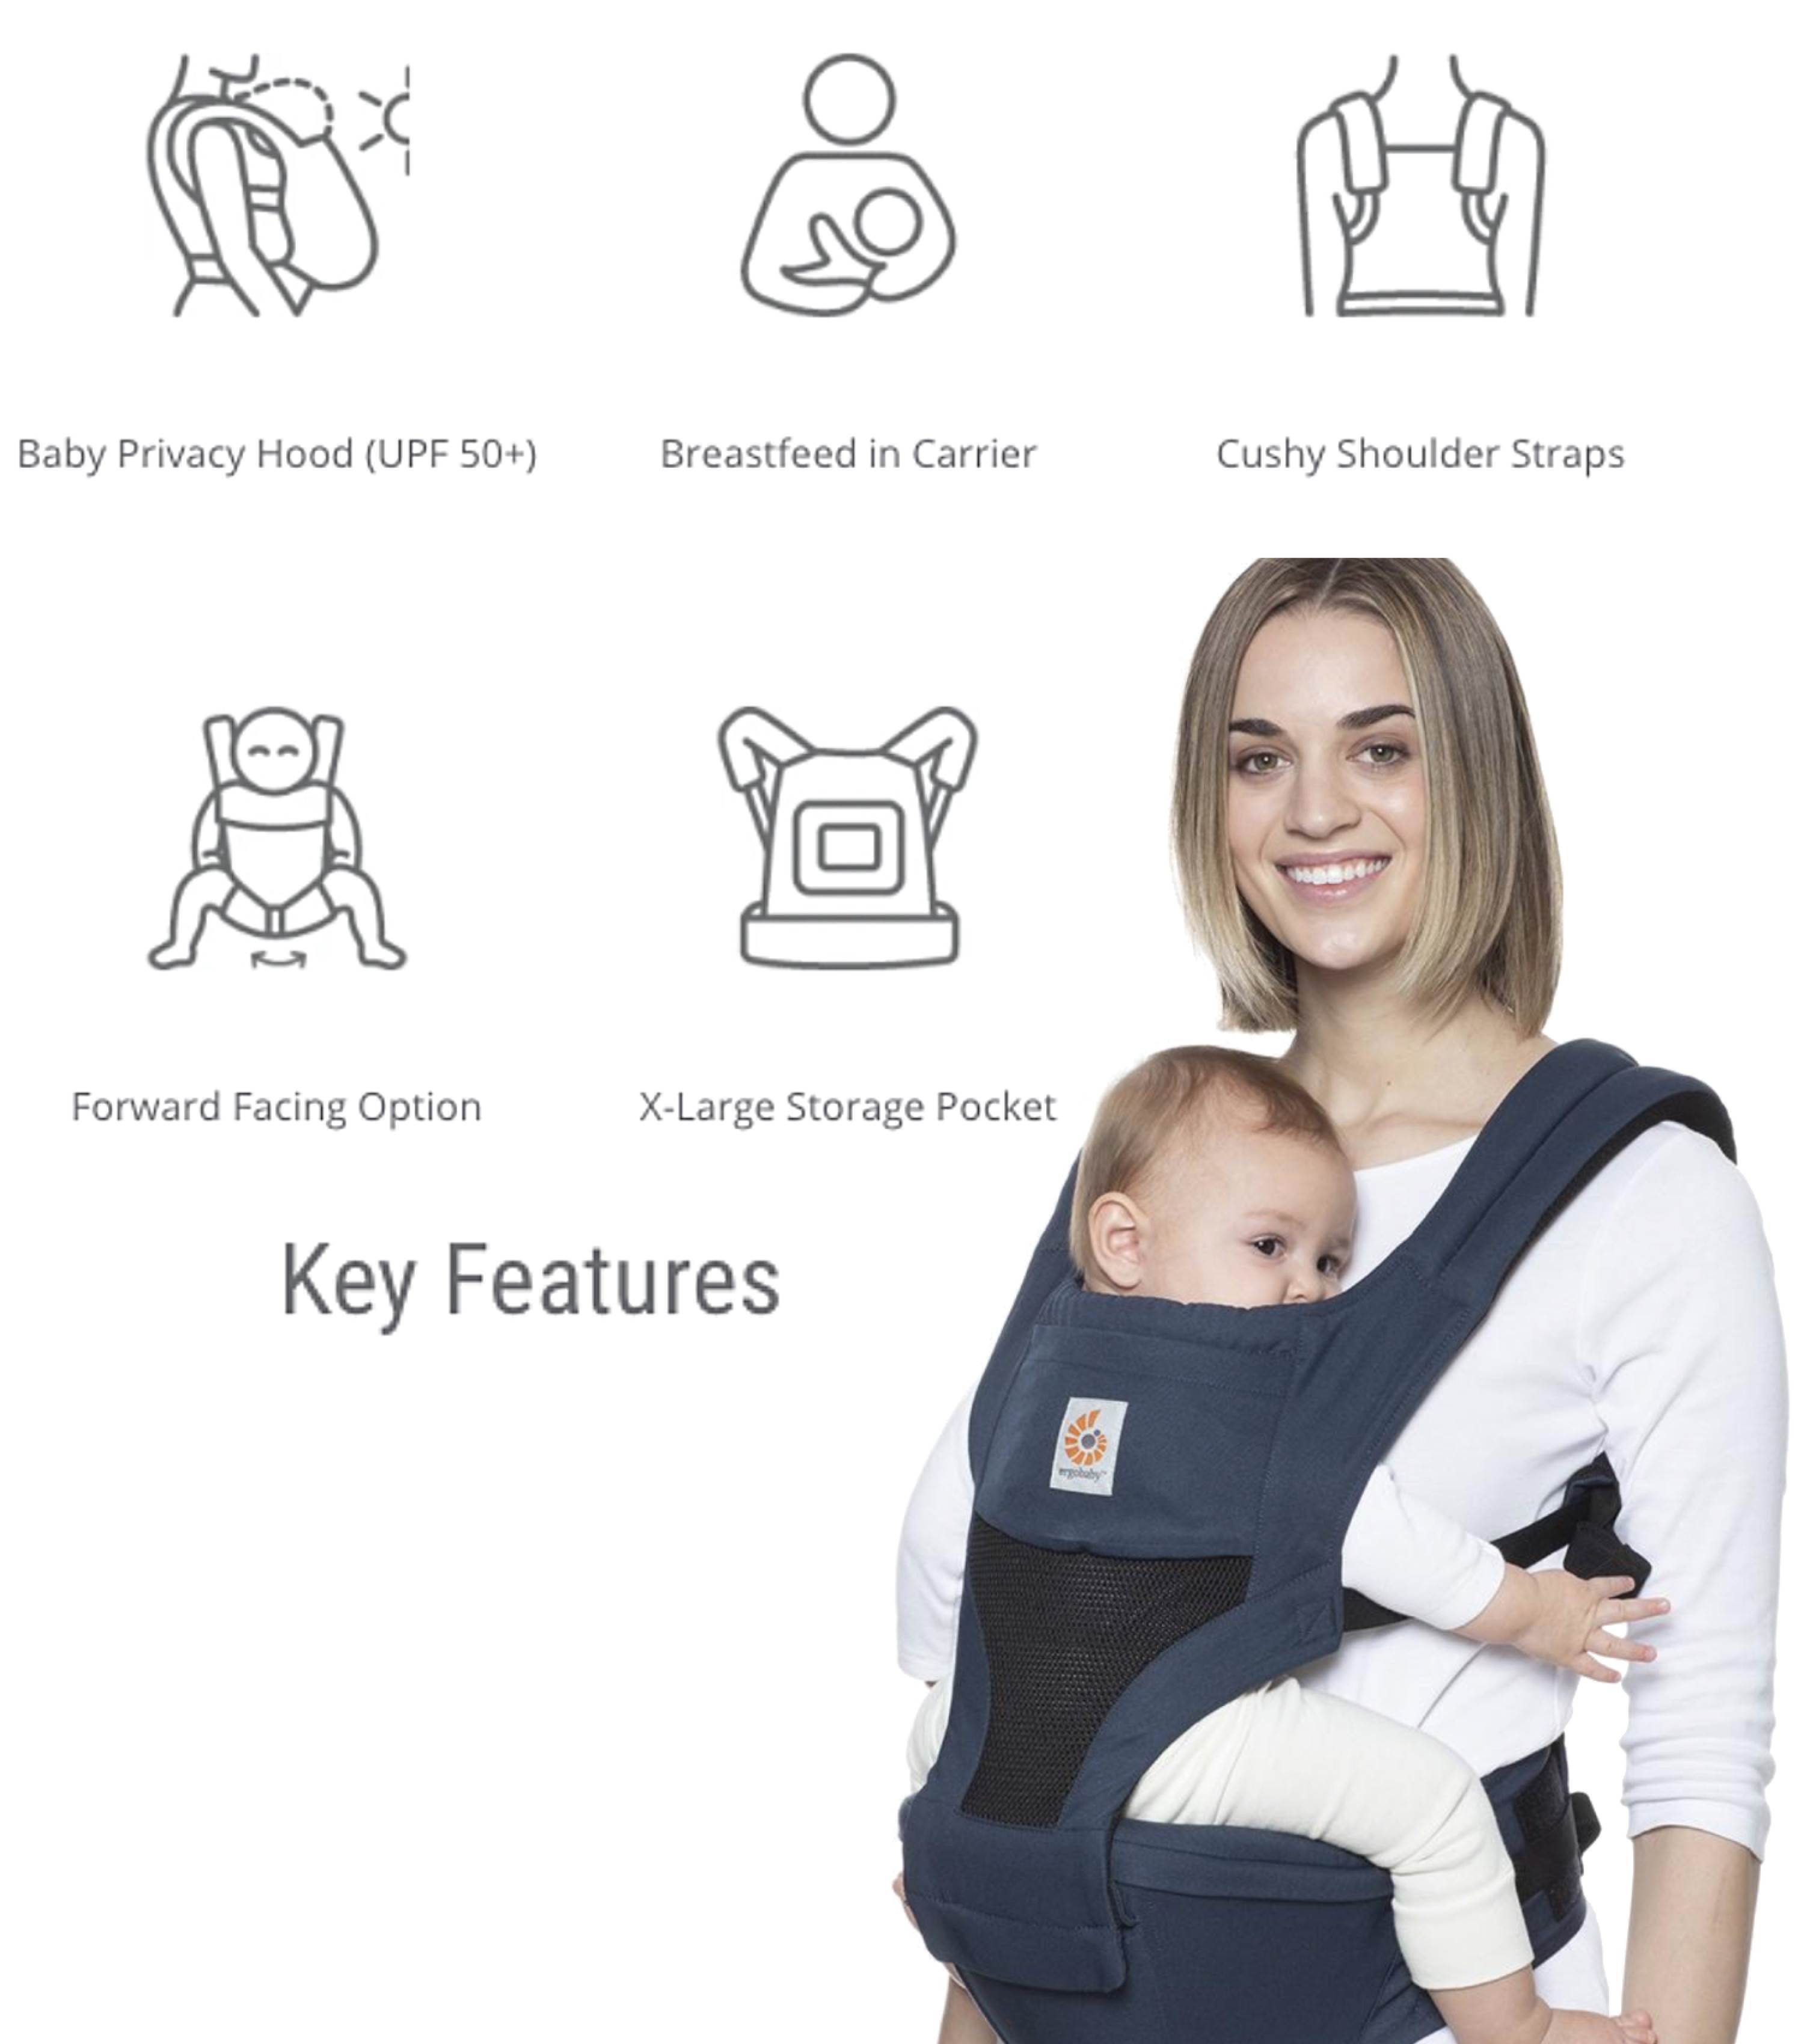 100% Guarantee and Free DELIVERY,Ideal Gift SONARIN 3 in 1 All Season Breathable Hipseat Baby Carrier,Sun Protection,Ergonomic,Multifunction,Easy Mom,Adapted to Your Childs Growing Gray 